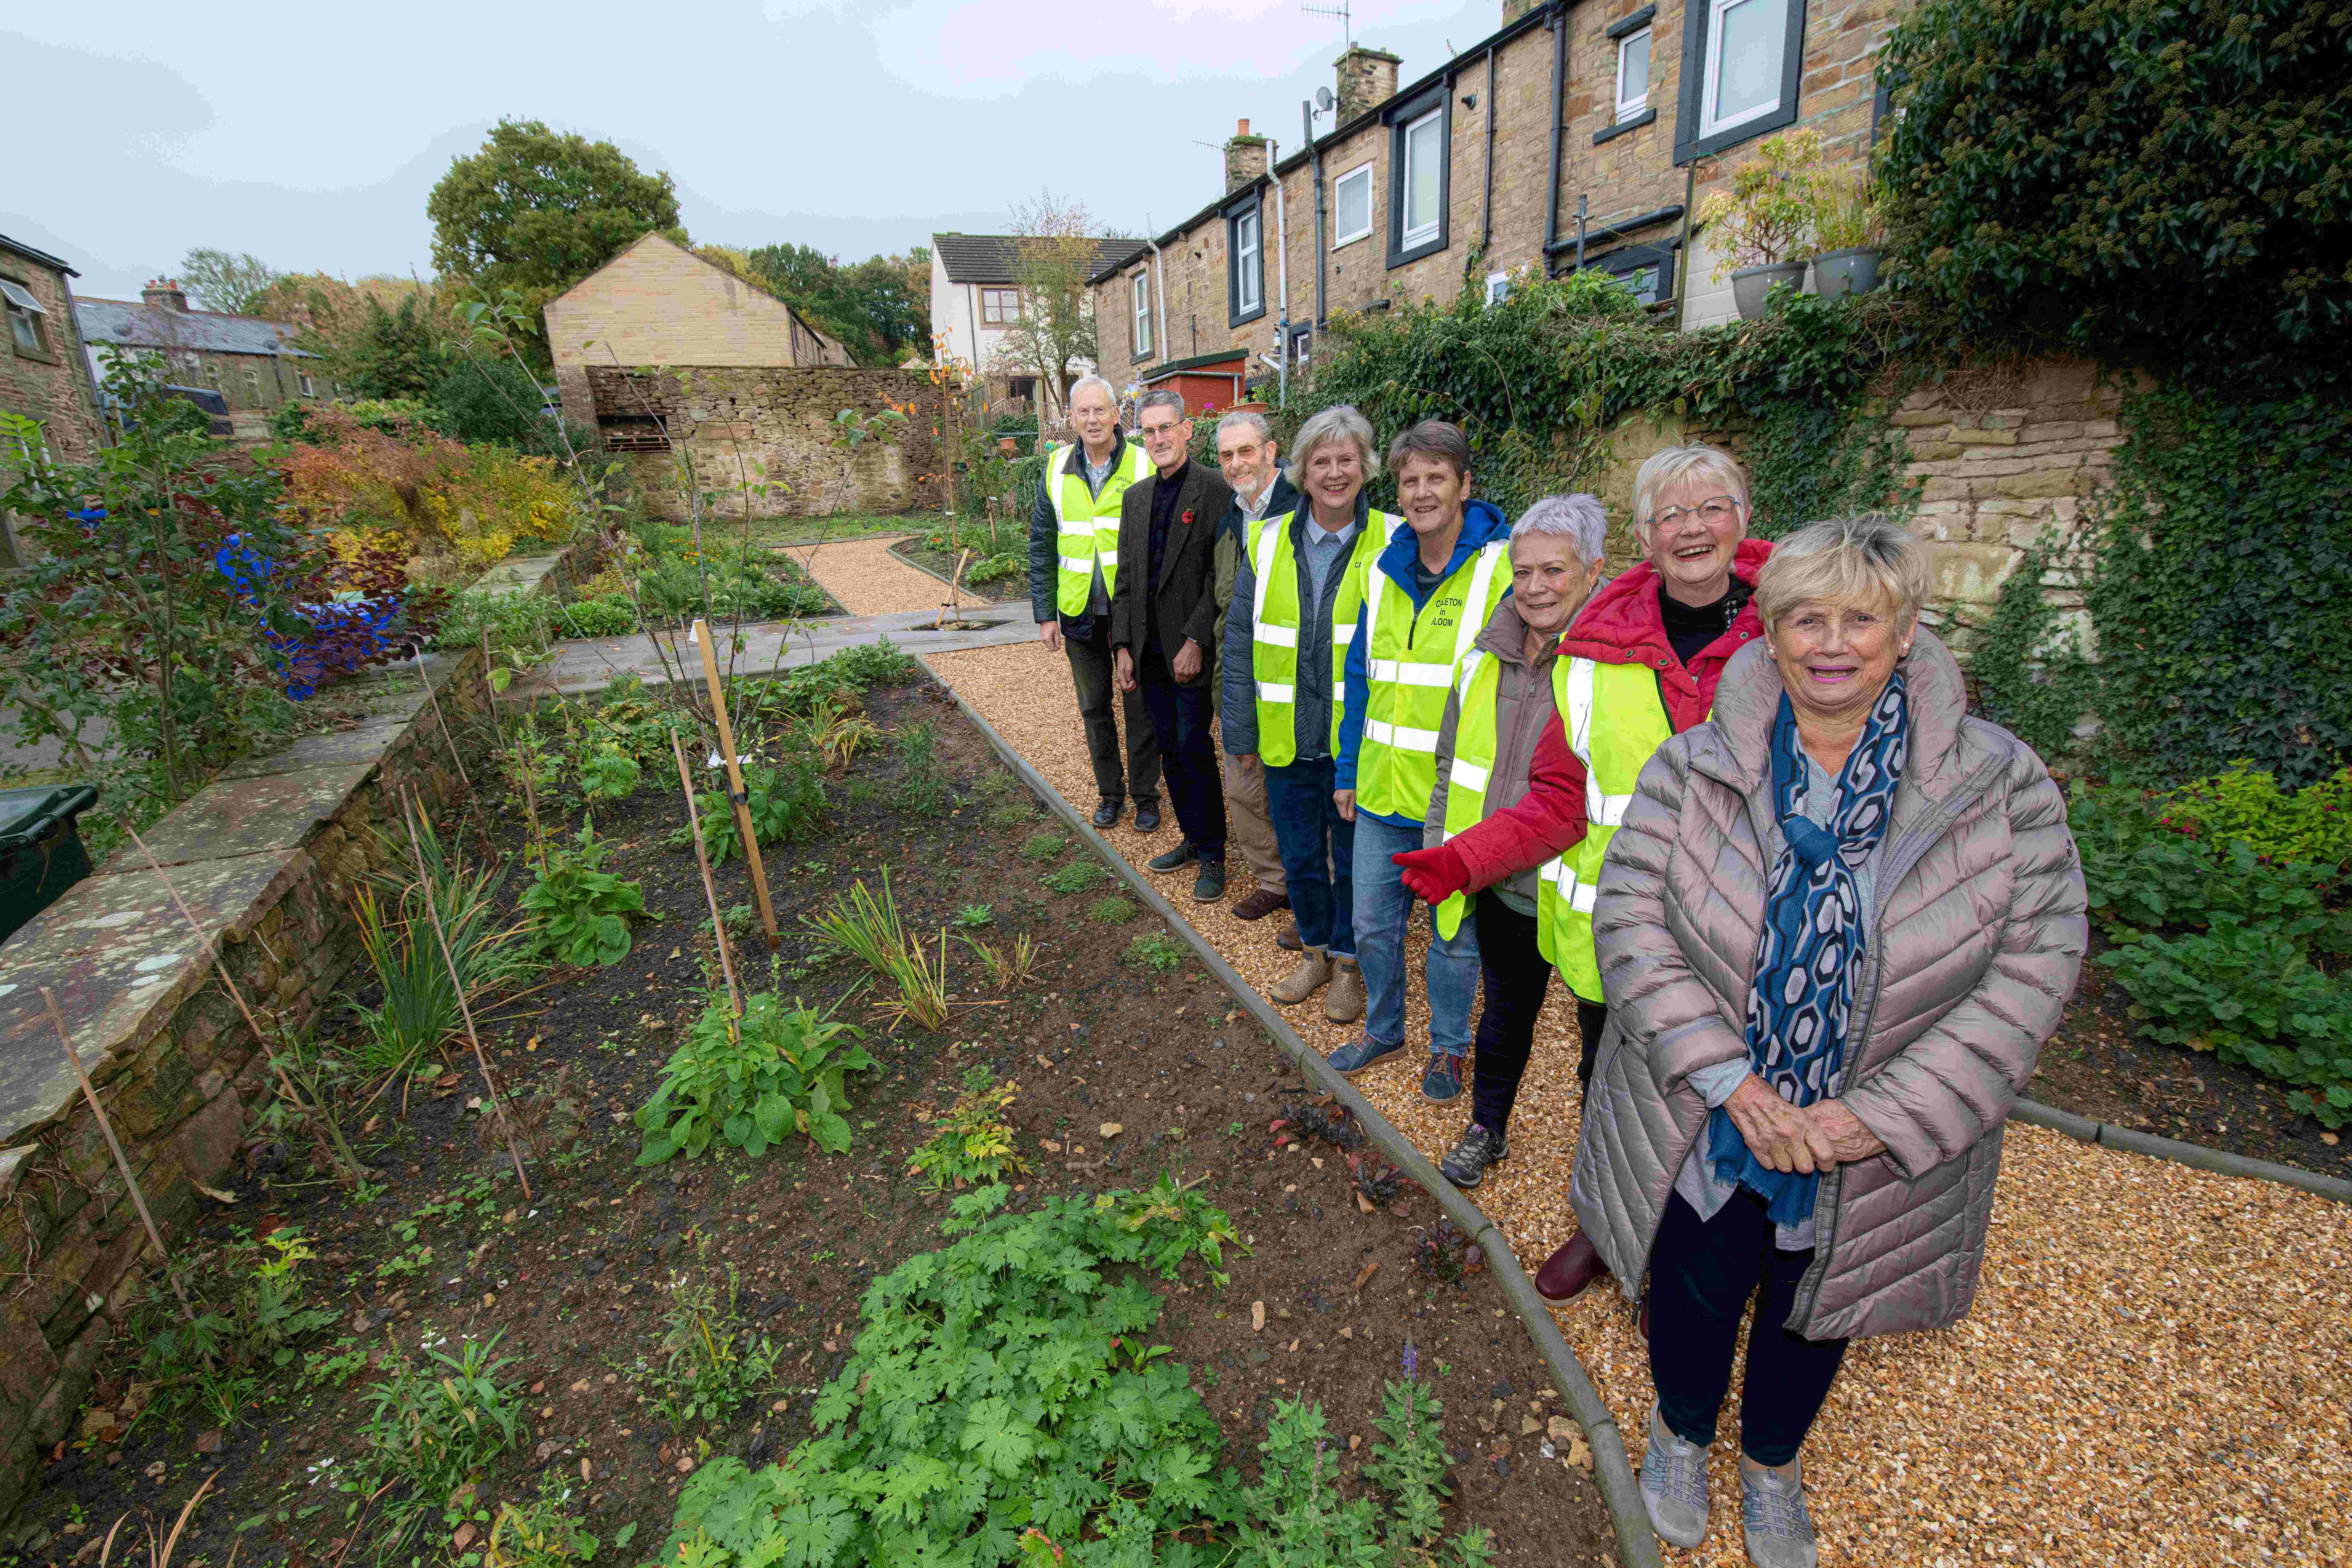 Member for the Skipton West and West Craven division, Cllr Andy Solloway, joins representatives from Carleton in Bloom in the community garden which is making a real difference to the local area. (From left to right) John Waterhouse, Cllr Solloway, Chris Judge, Sue Brown, Corinne Ludford, Fiona Steel, Carol Stocks and Vicki Woodhead.